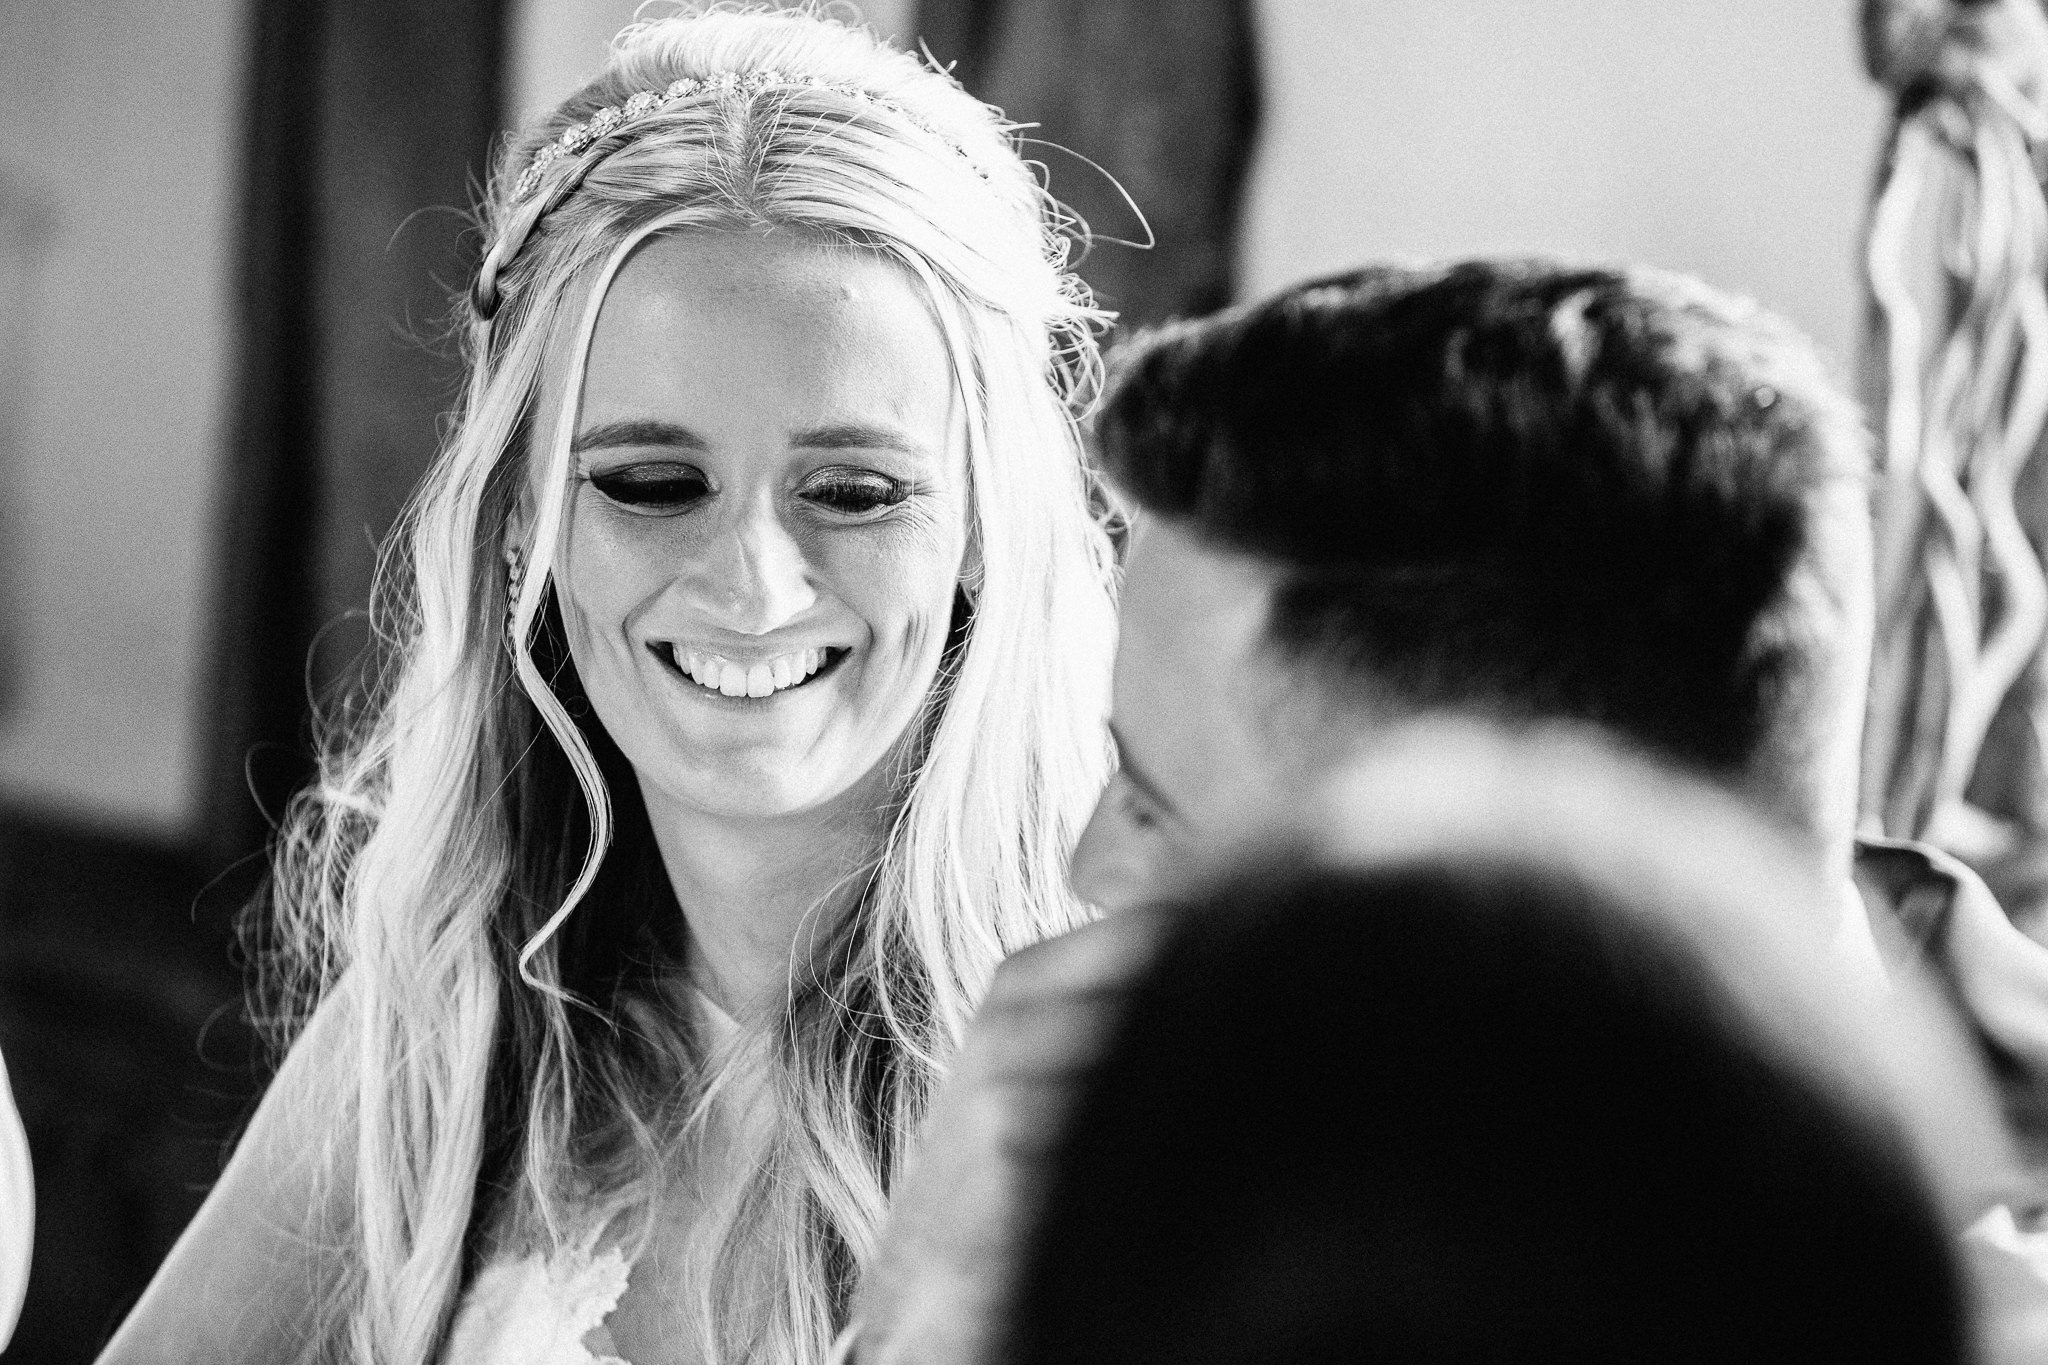  Bride smiling at the Groom 